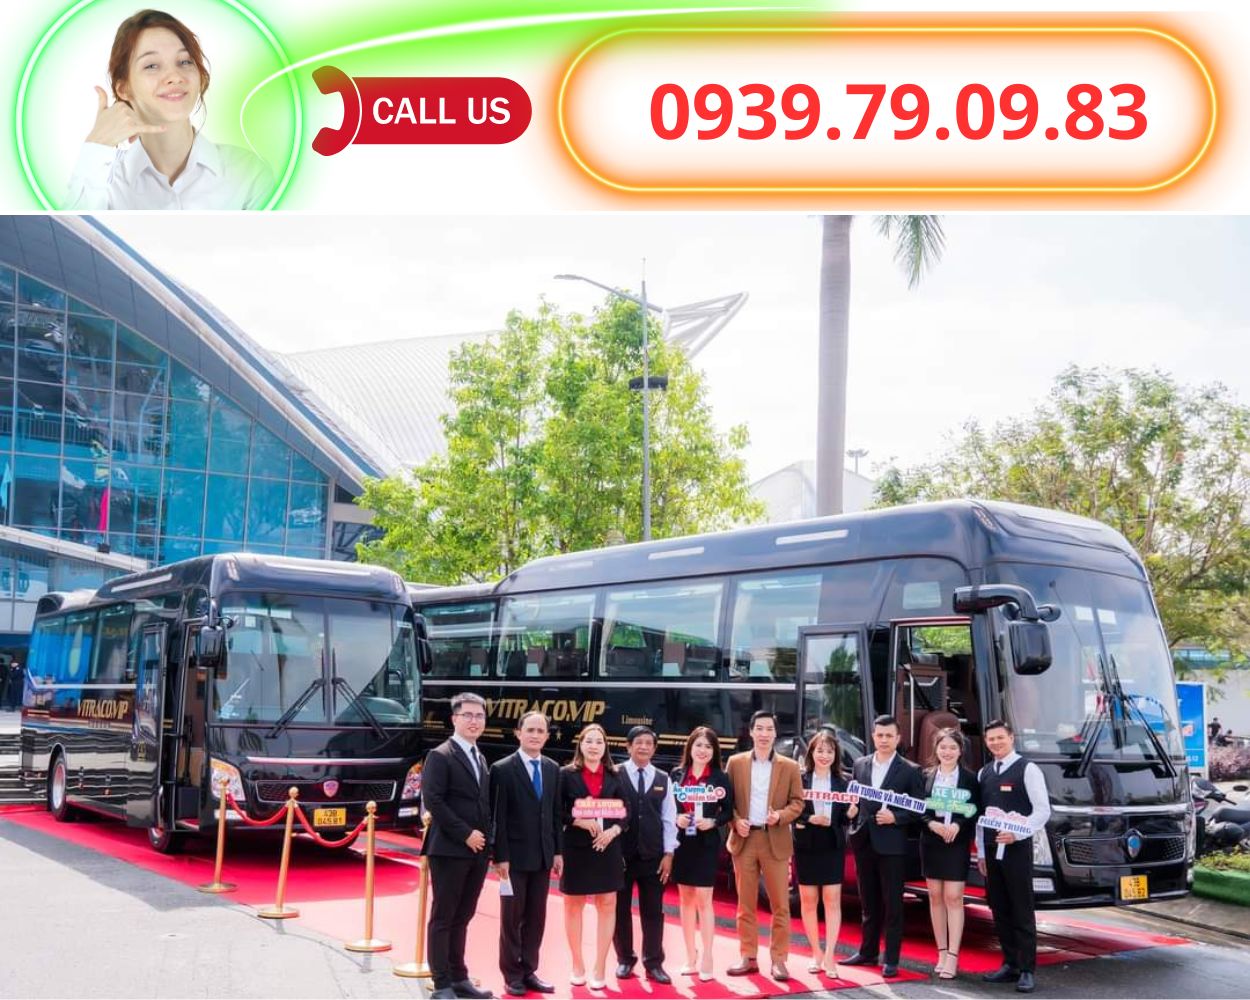 18-seat Limousine Car Rental Price List Contract to Interprovince